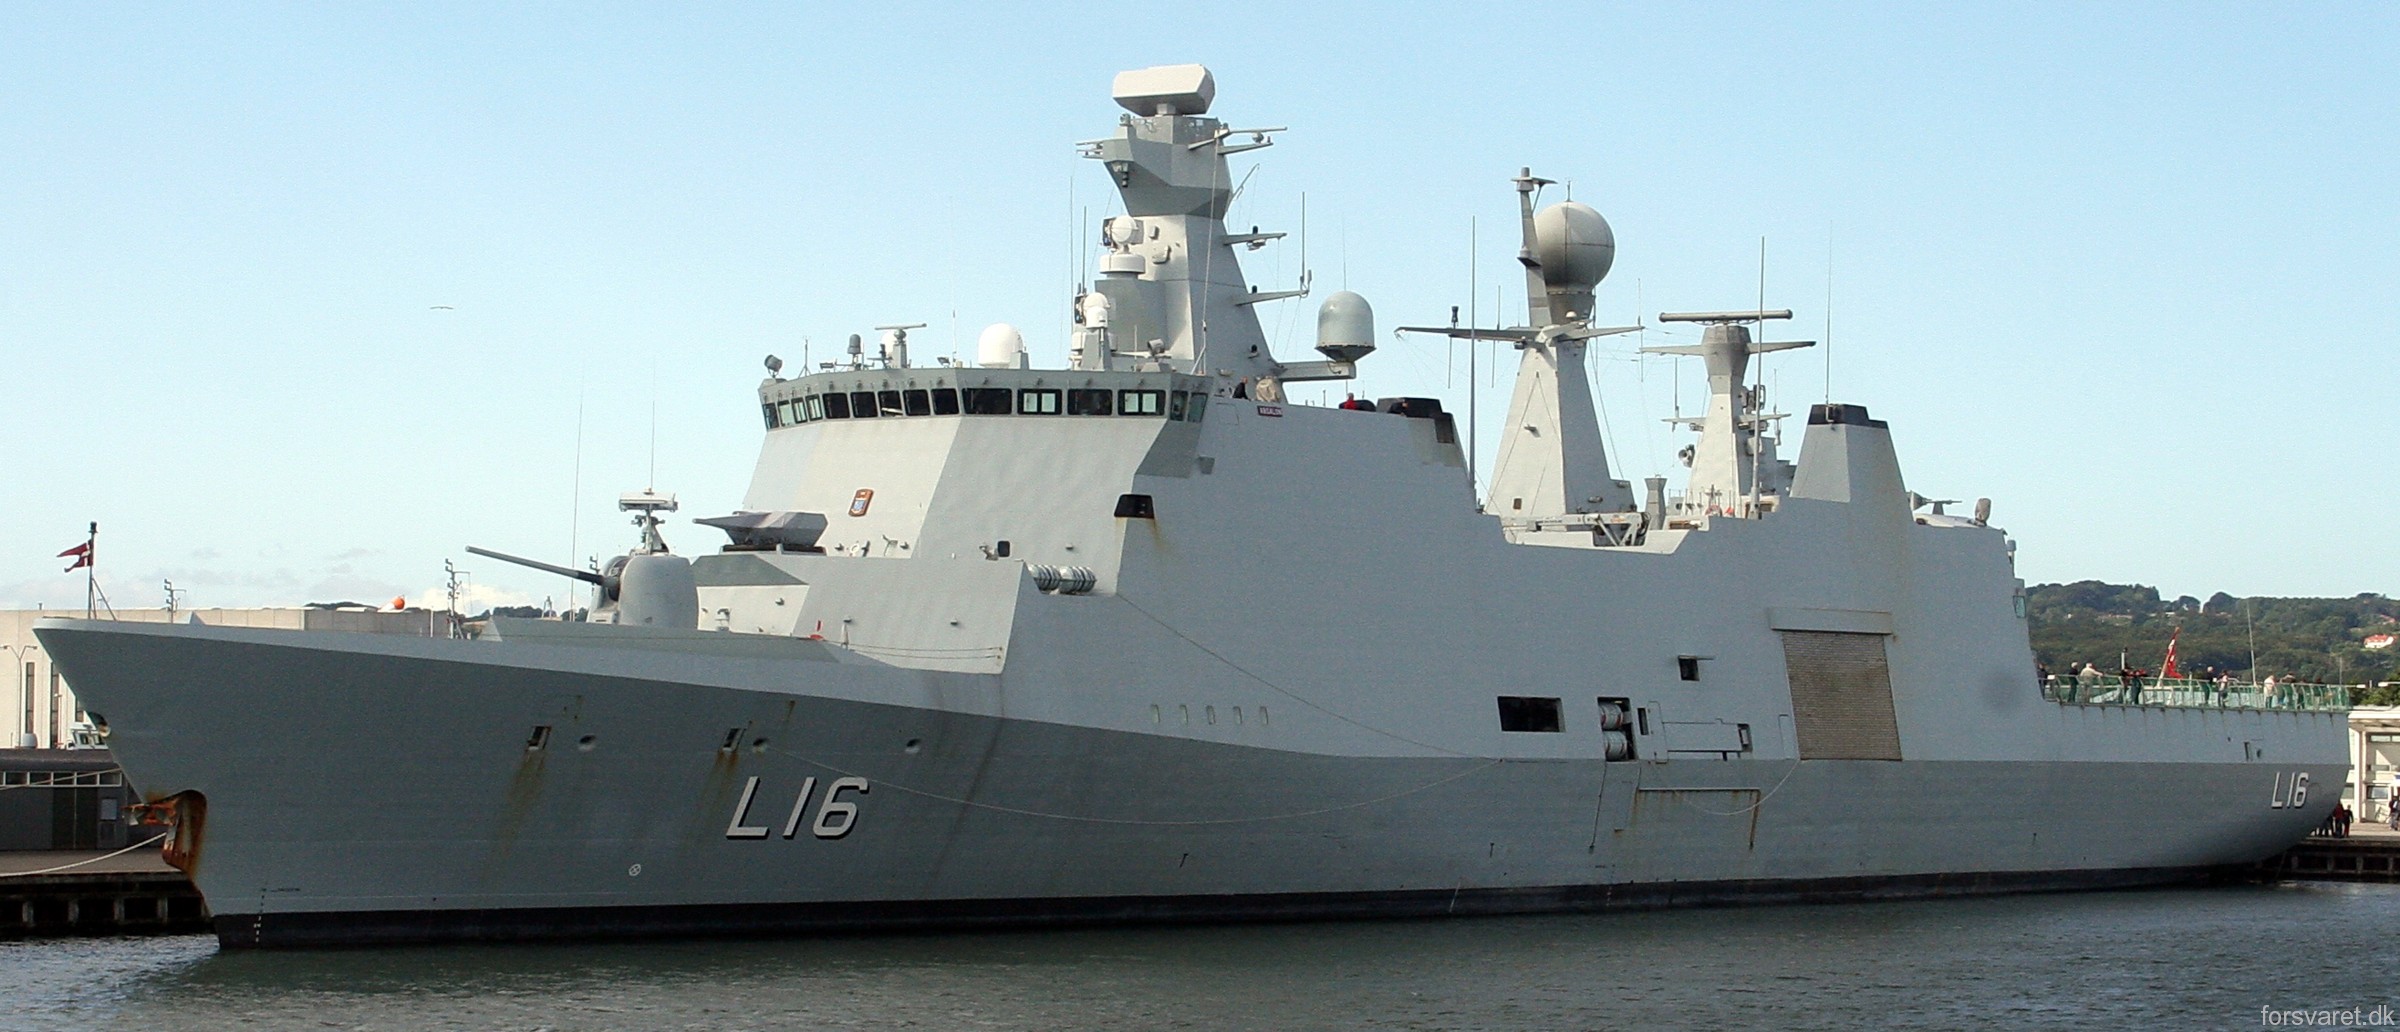 l-16 hdms absalon command support ship frigate royal danish navy 84